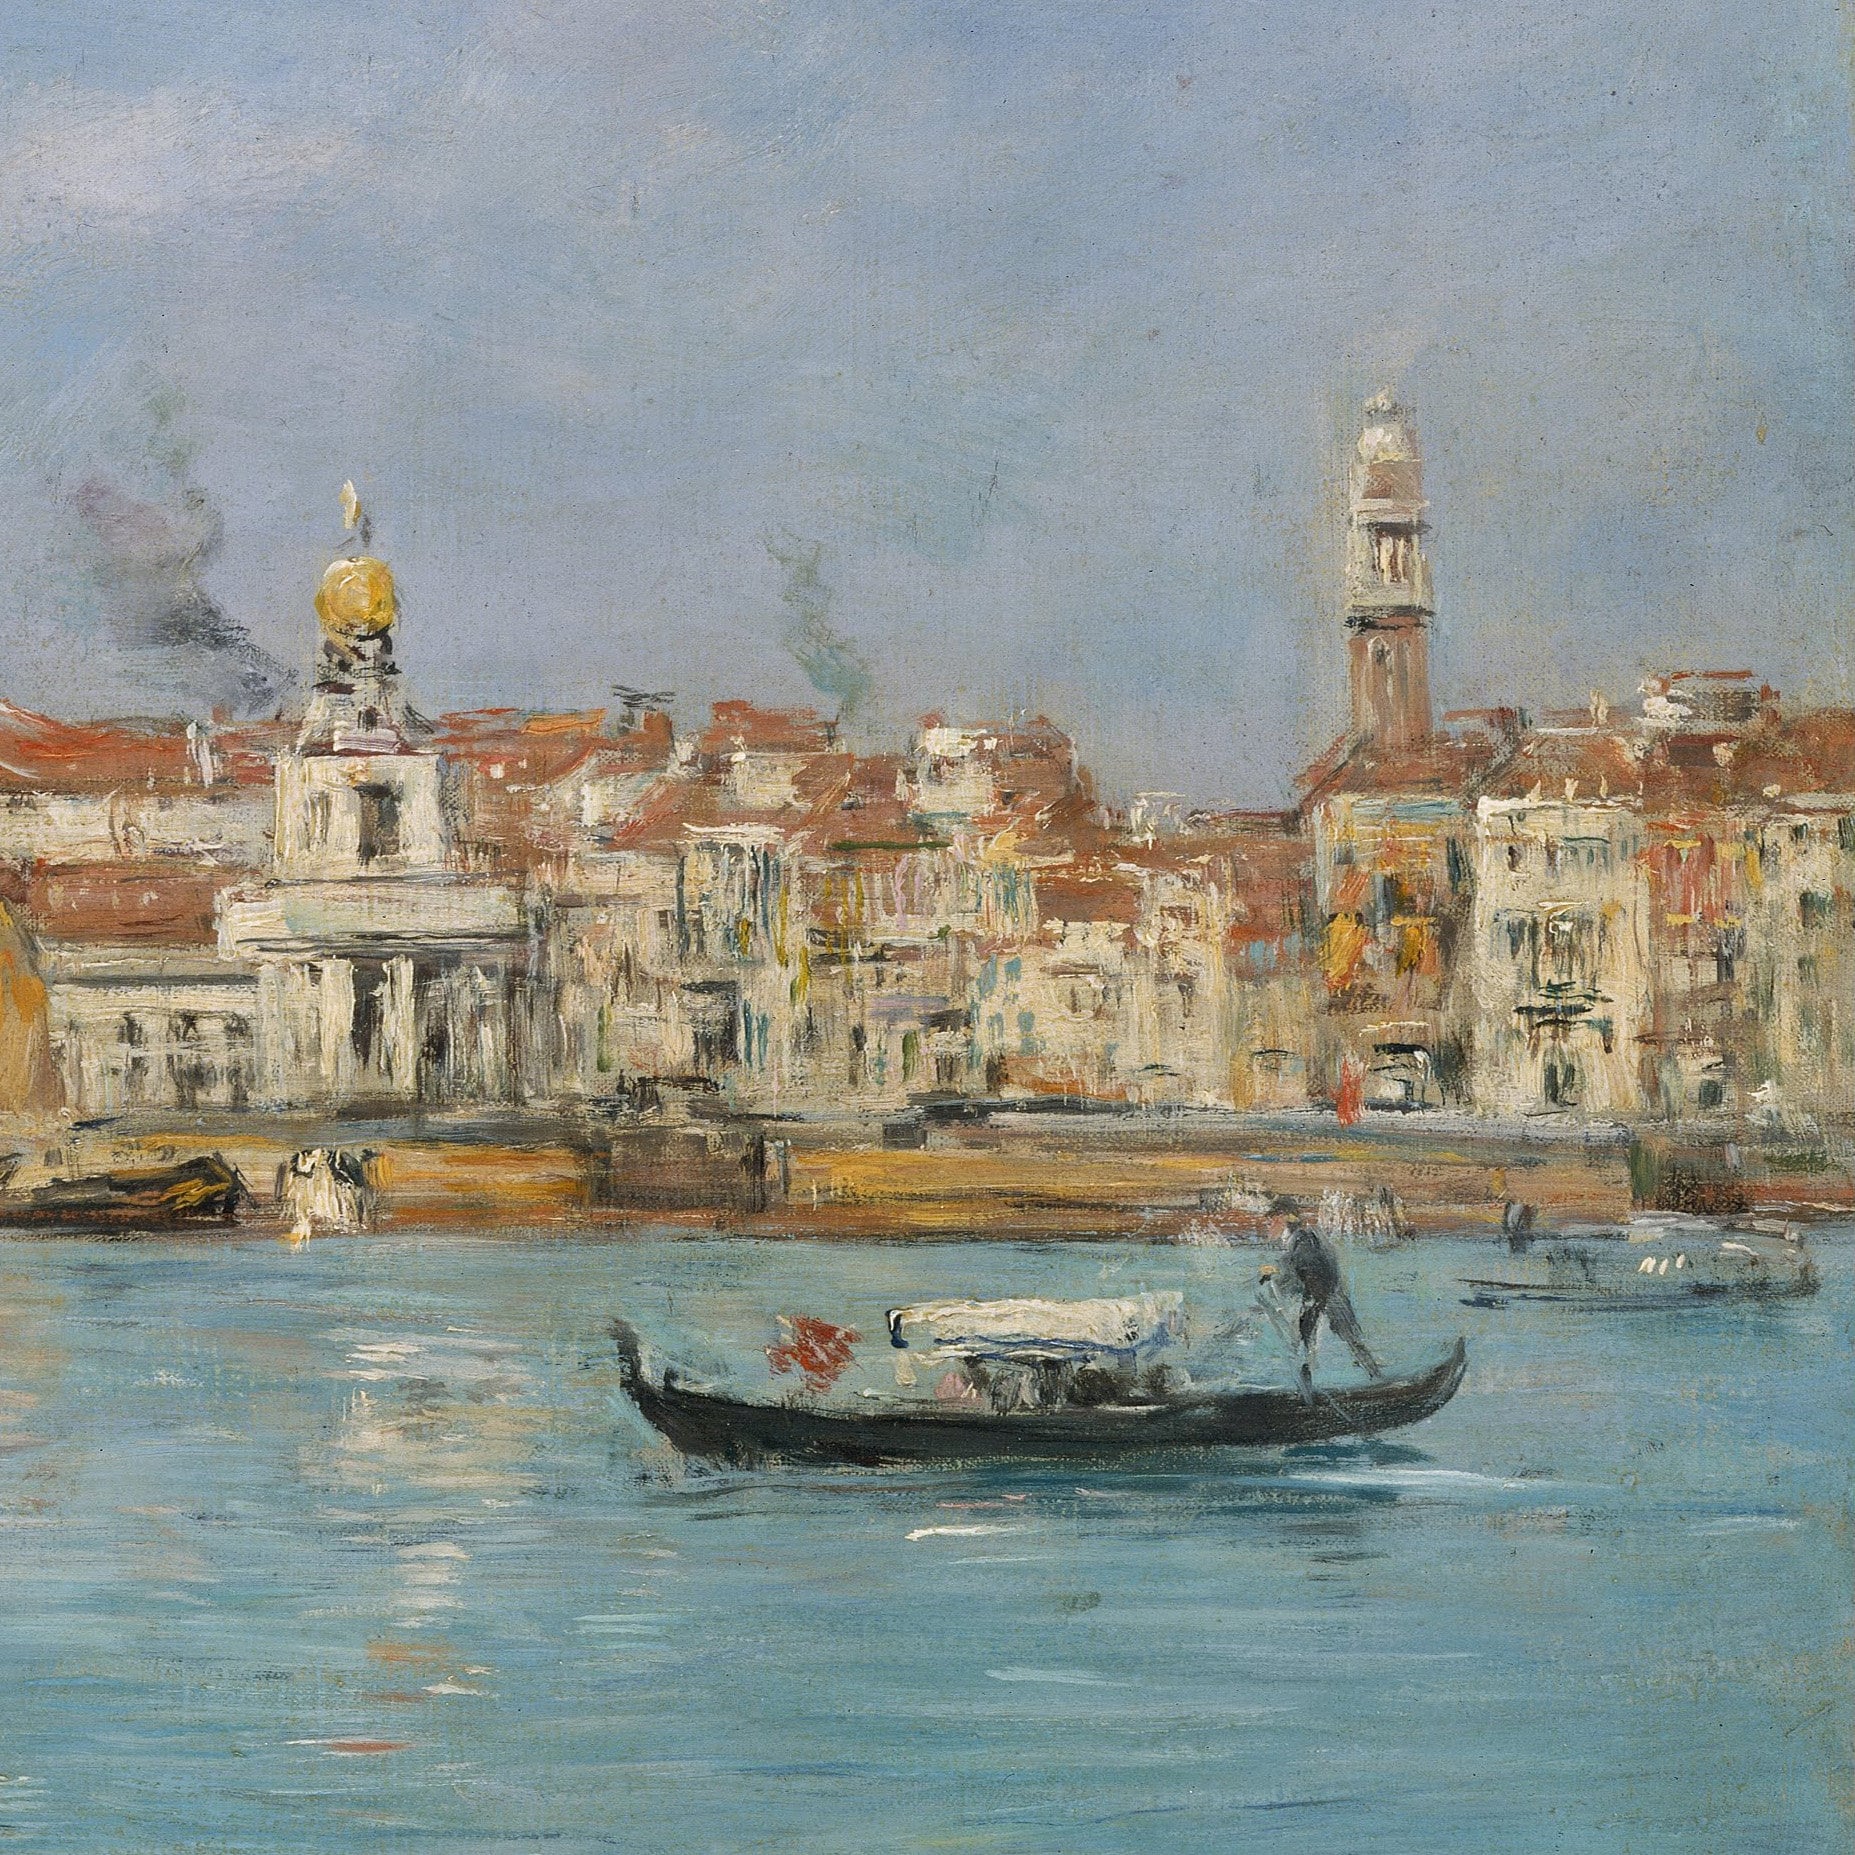 Venice, Santa Maria della Salute by Eugène Boudin, 3d Printed with texture and brush strokes looks like original oil-painting, code:403